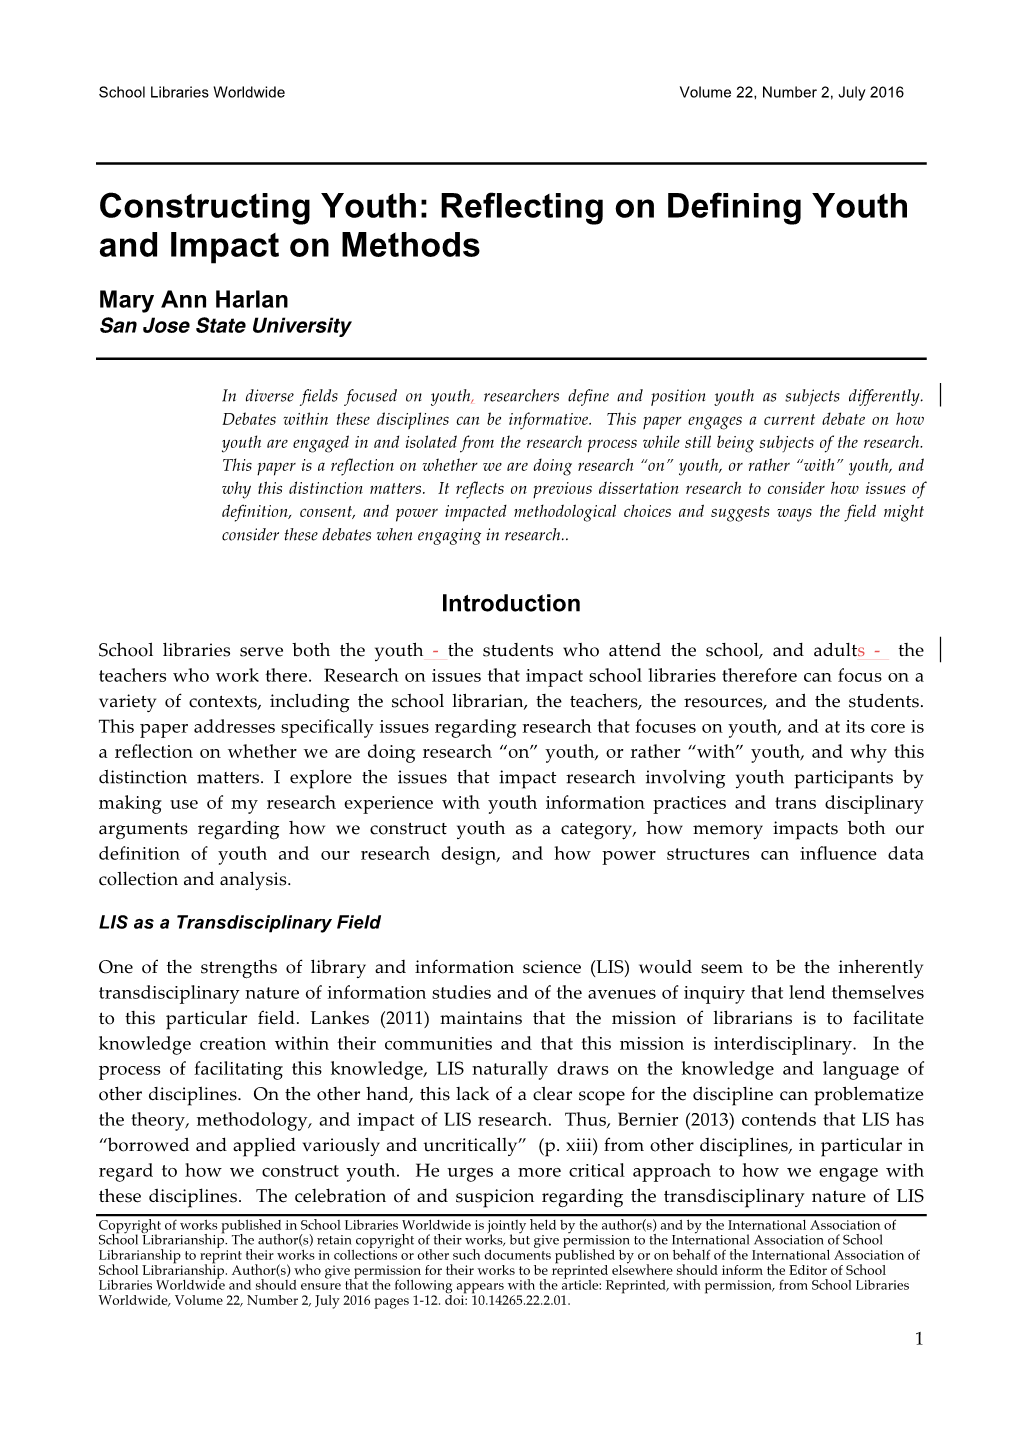 Constructing Youth: Reflecting on Defining Youth and Impact on Methods